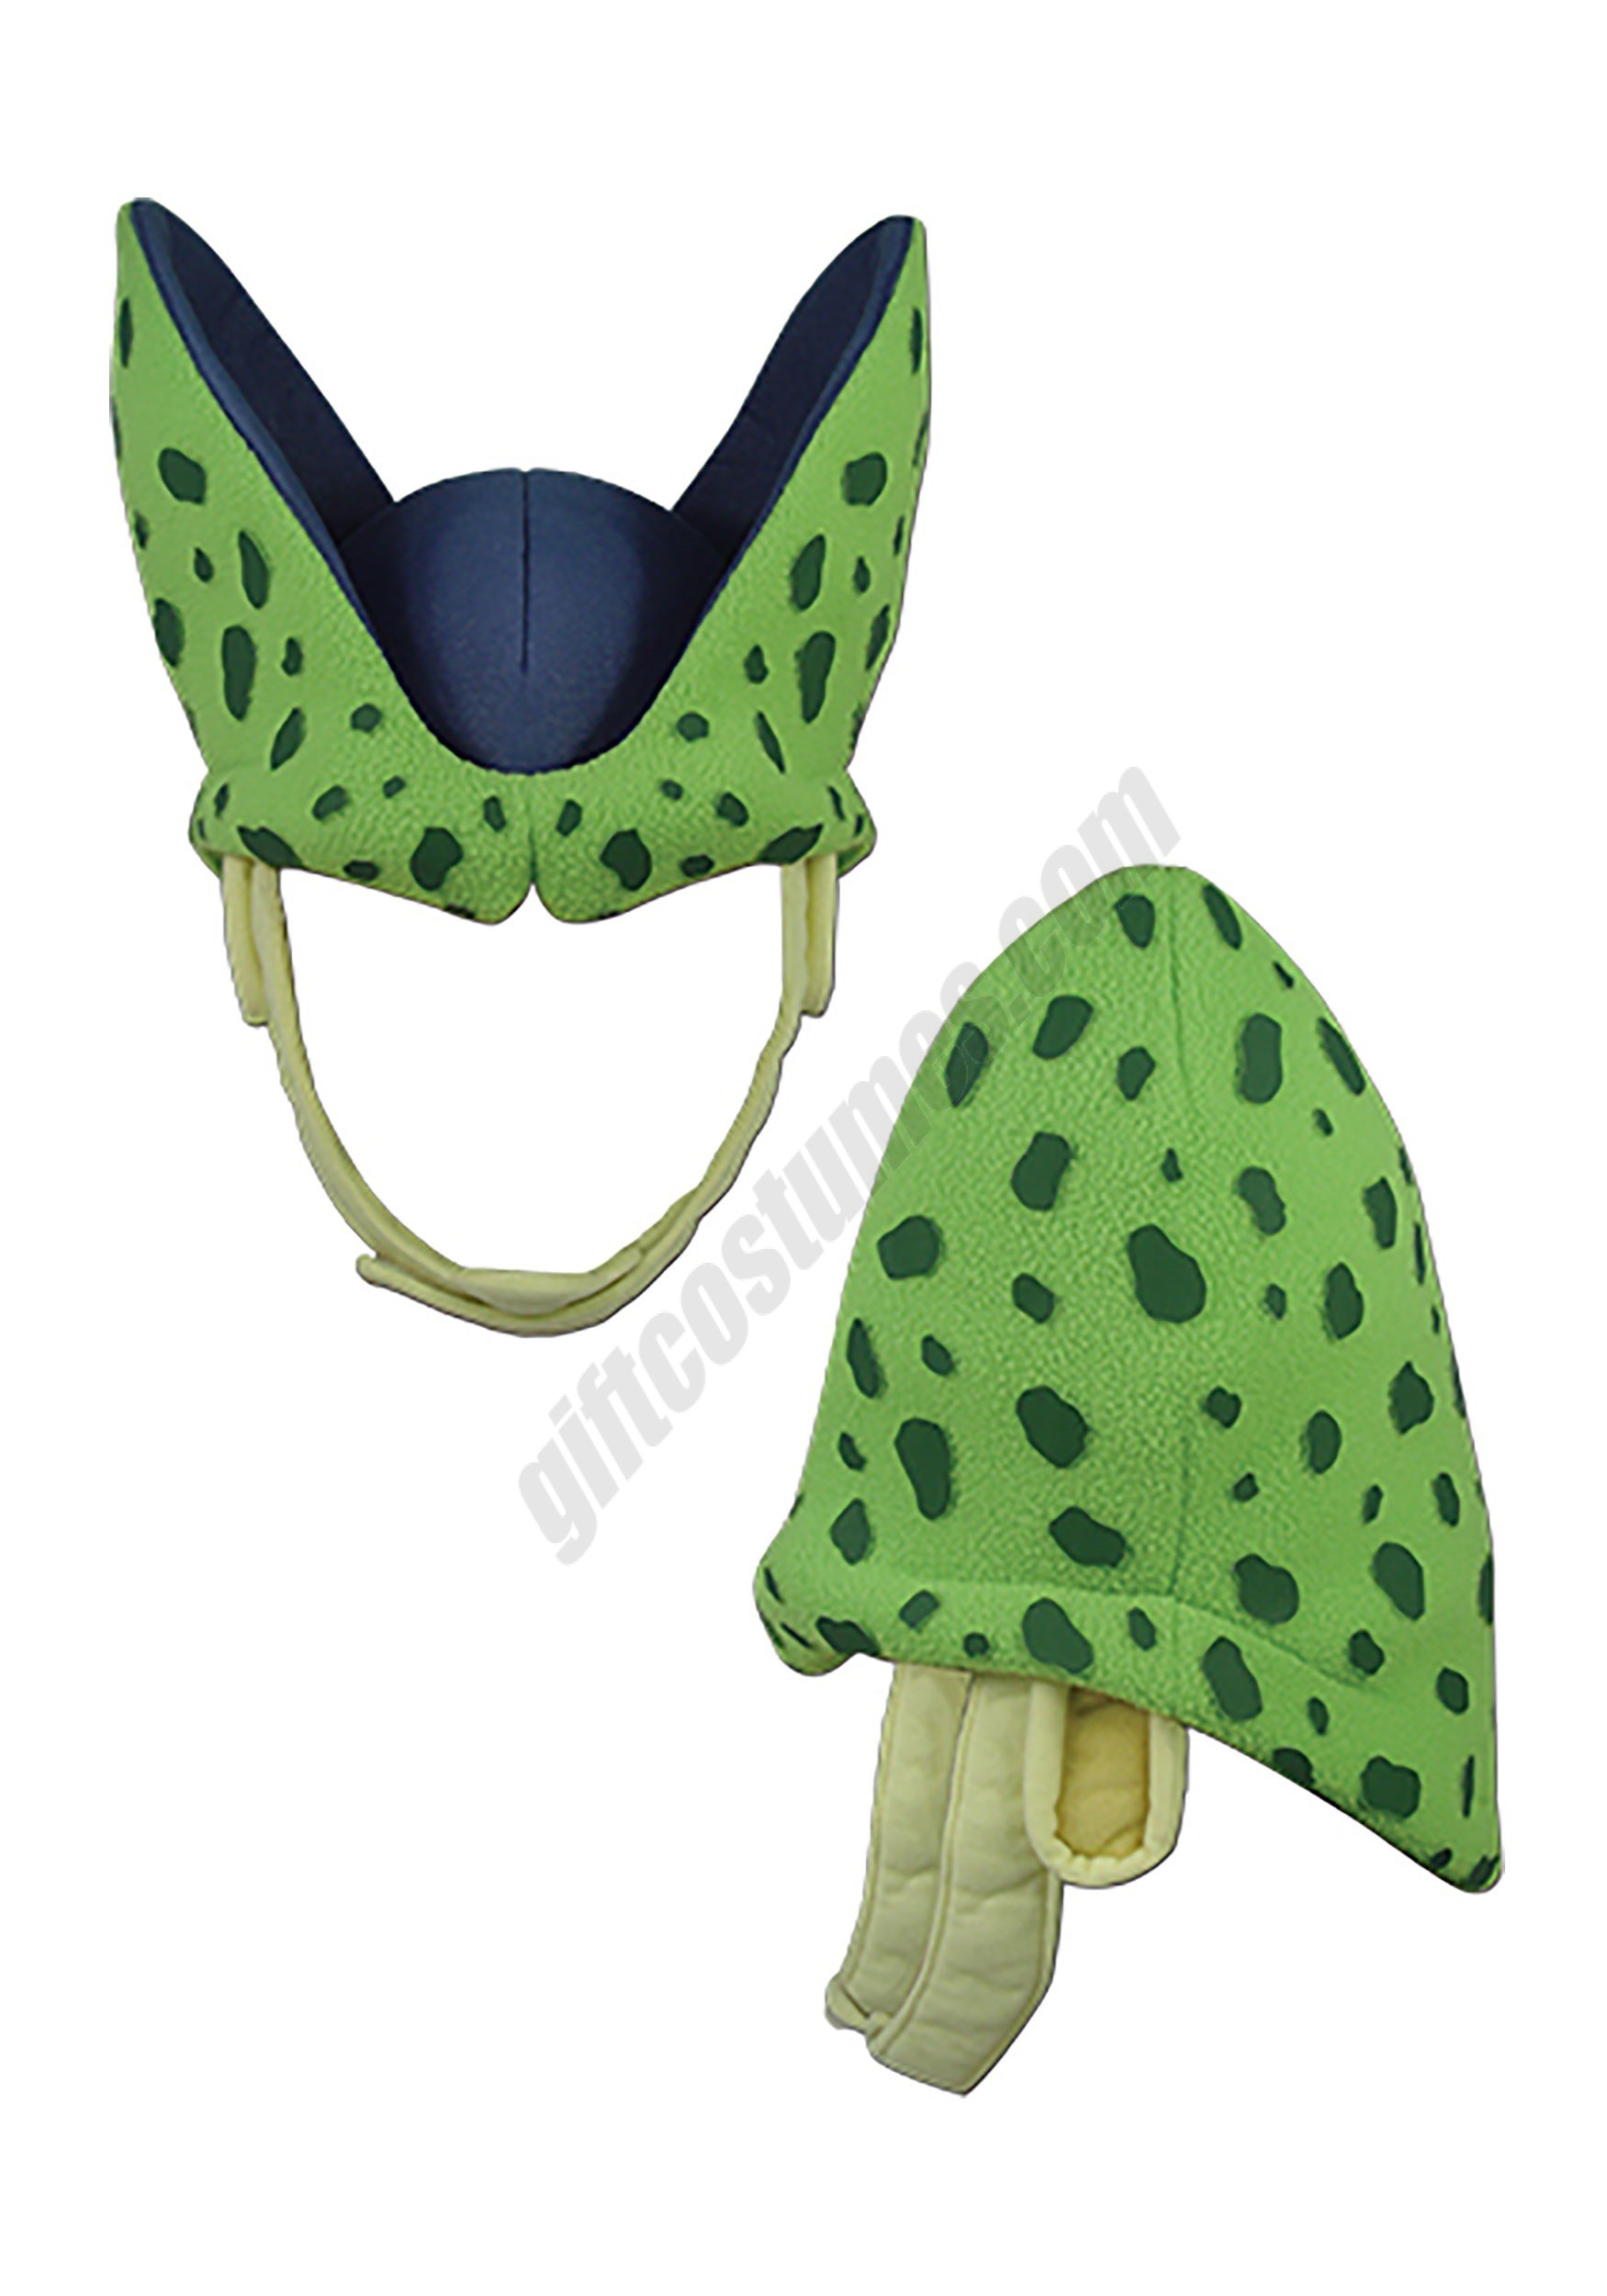 Dragon Ball Z Cell Costume Cap for Adults Promotions - Dragon Ball Z Cell Costume Cap for Adults Promotions